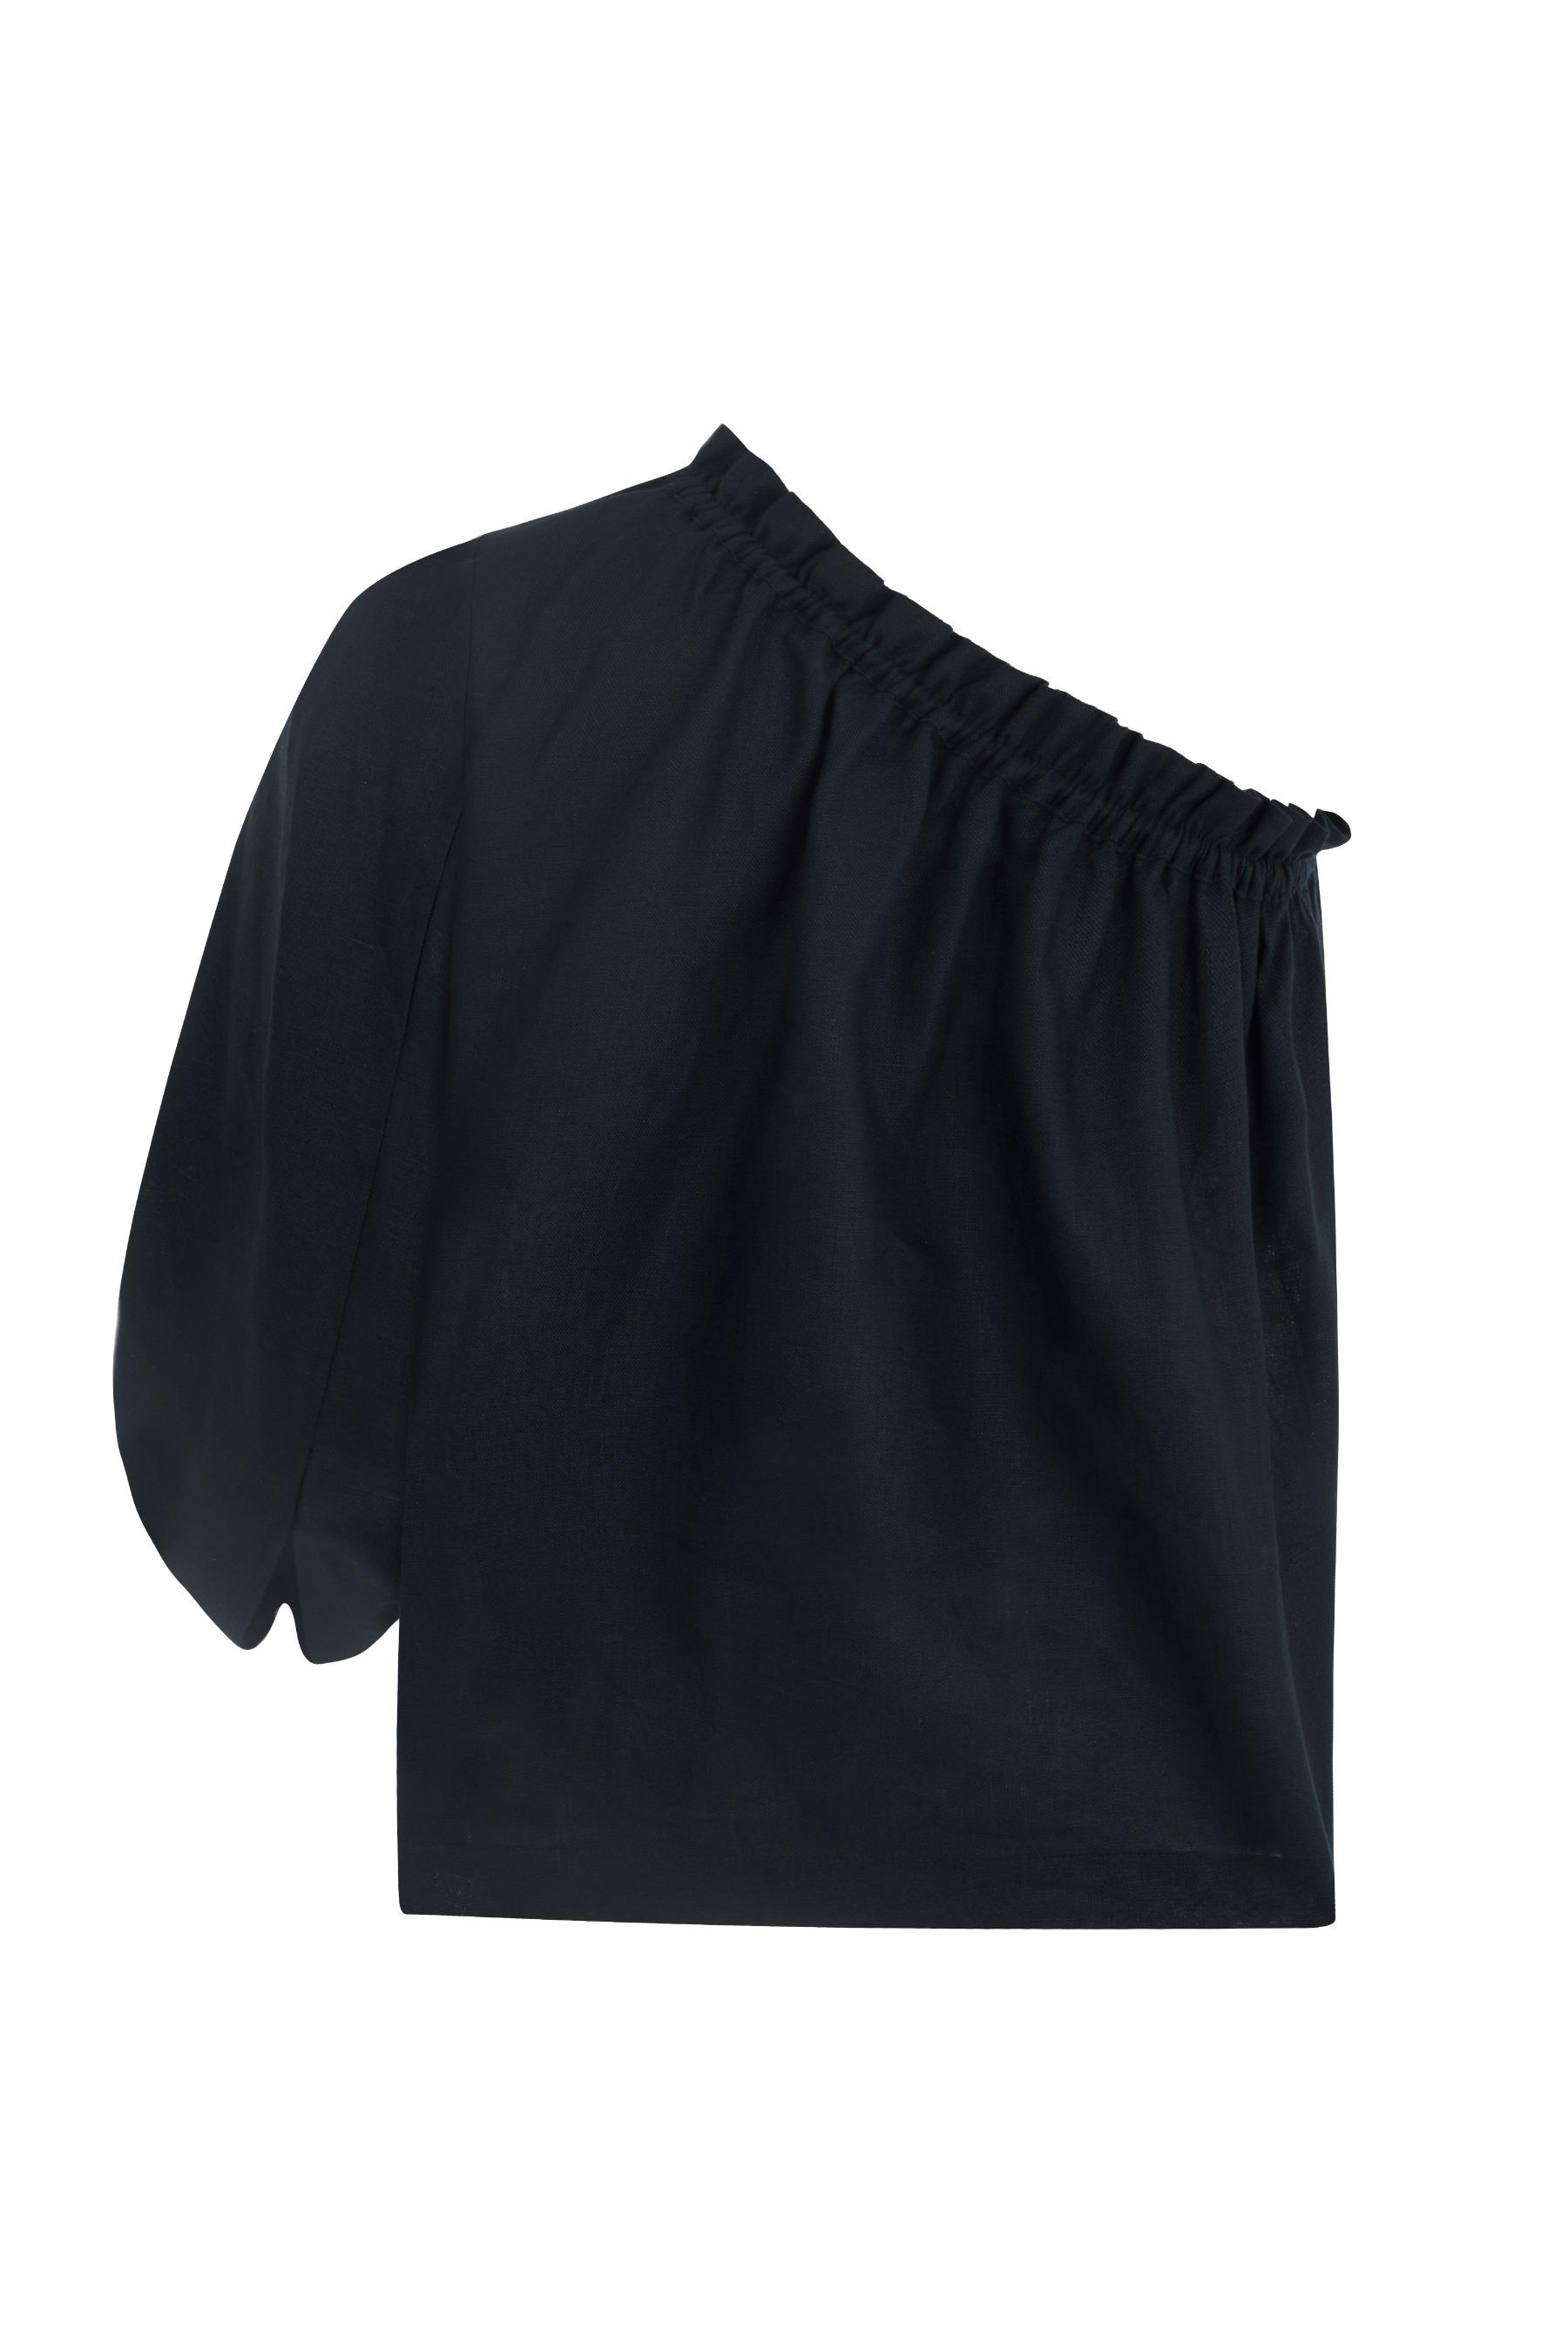 Navy Linen One Sleeve Top | Labeca London